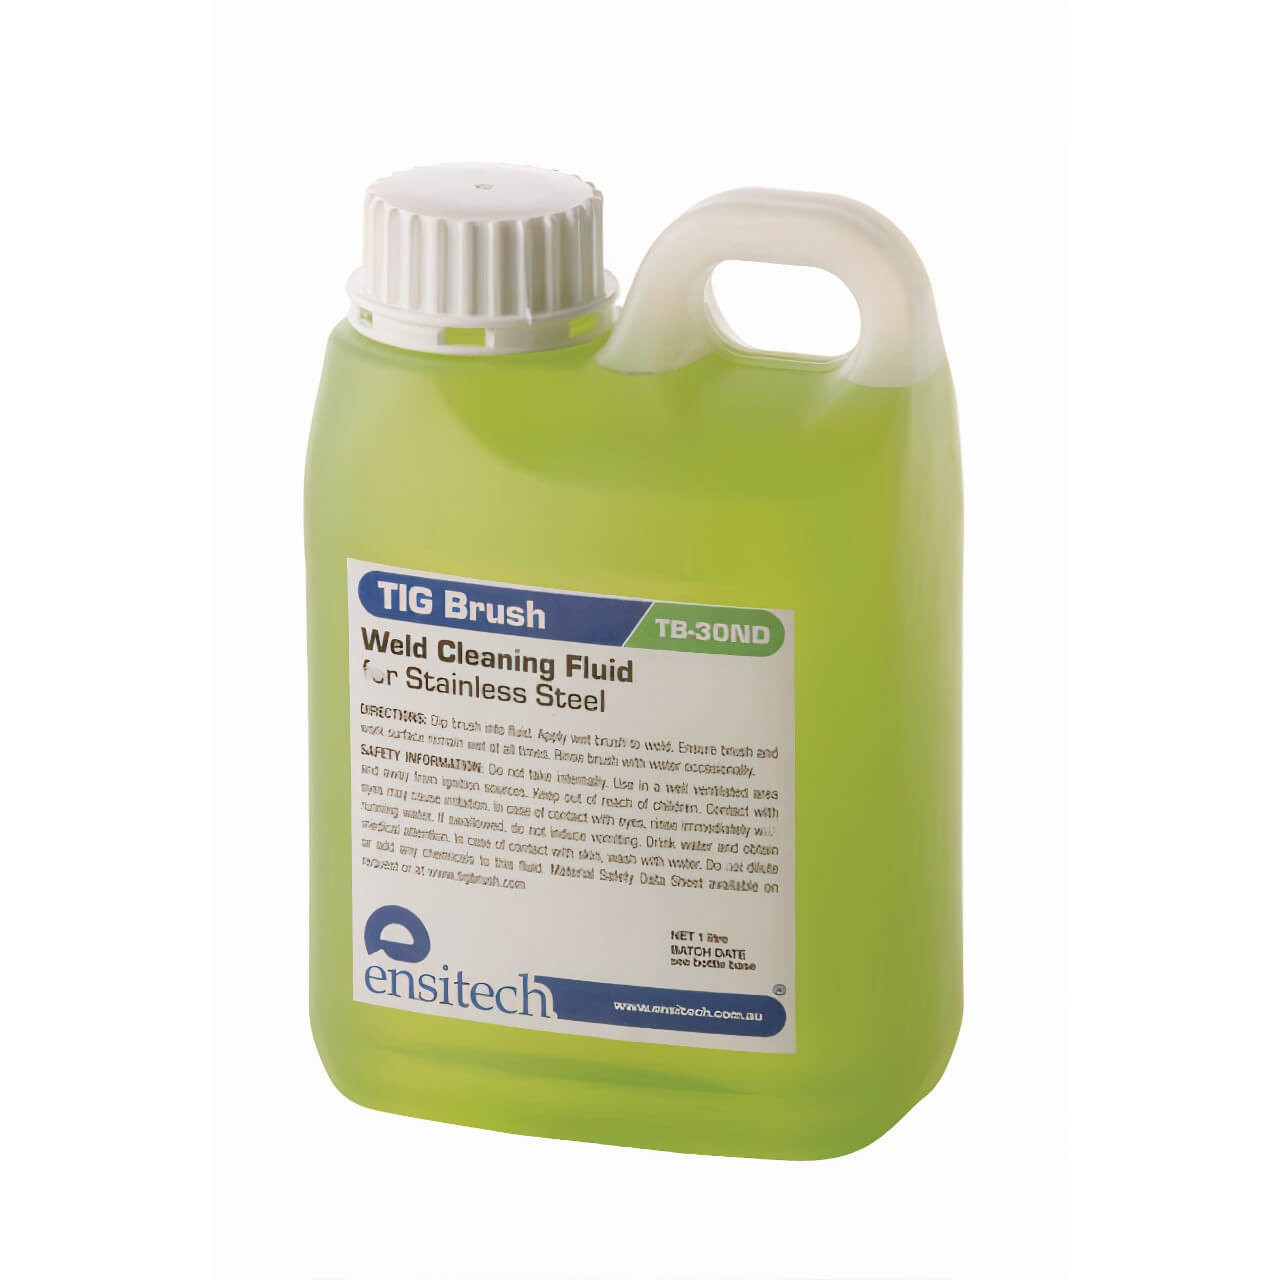 Tig Brush TB-30ND Weld Cleaning Fluid 1 Litre